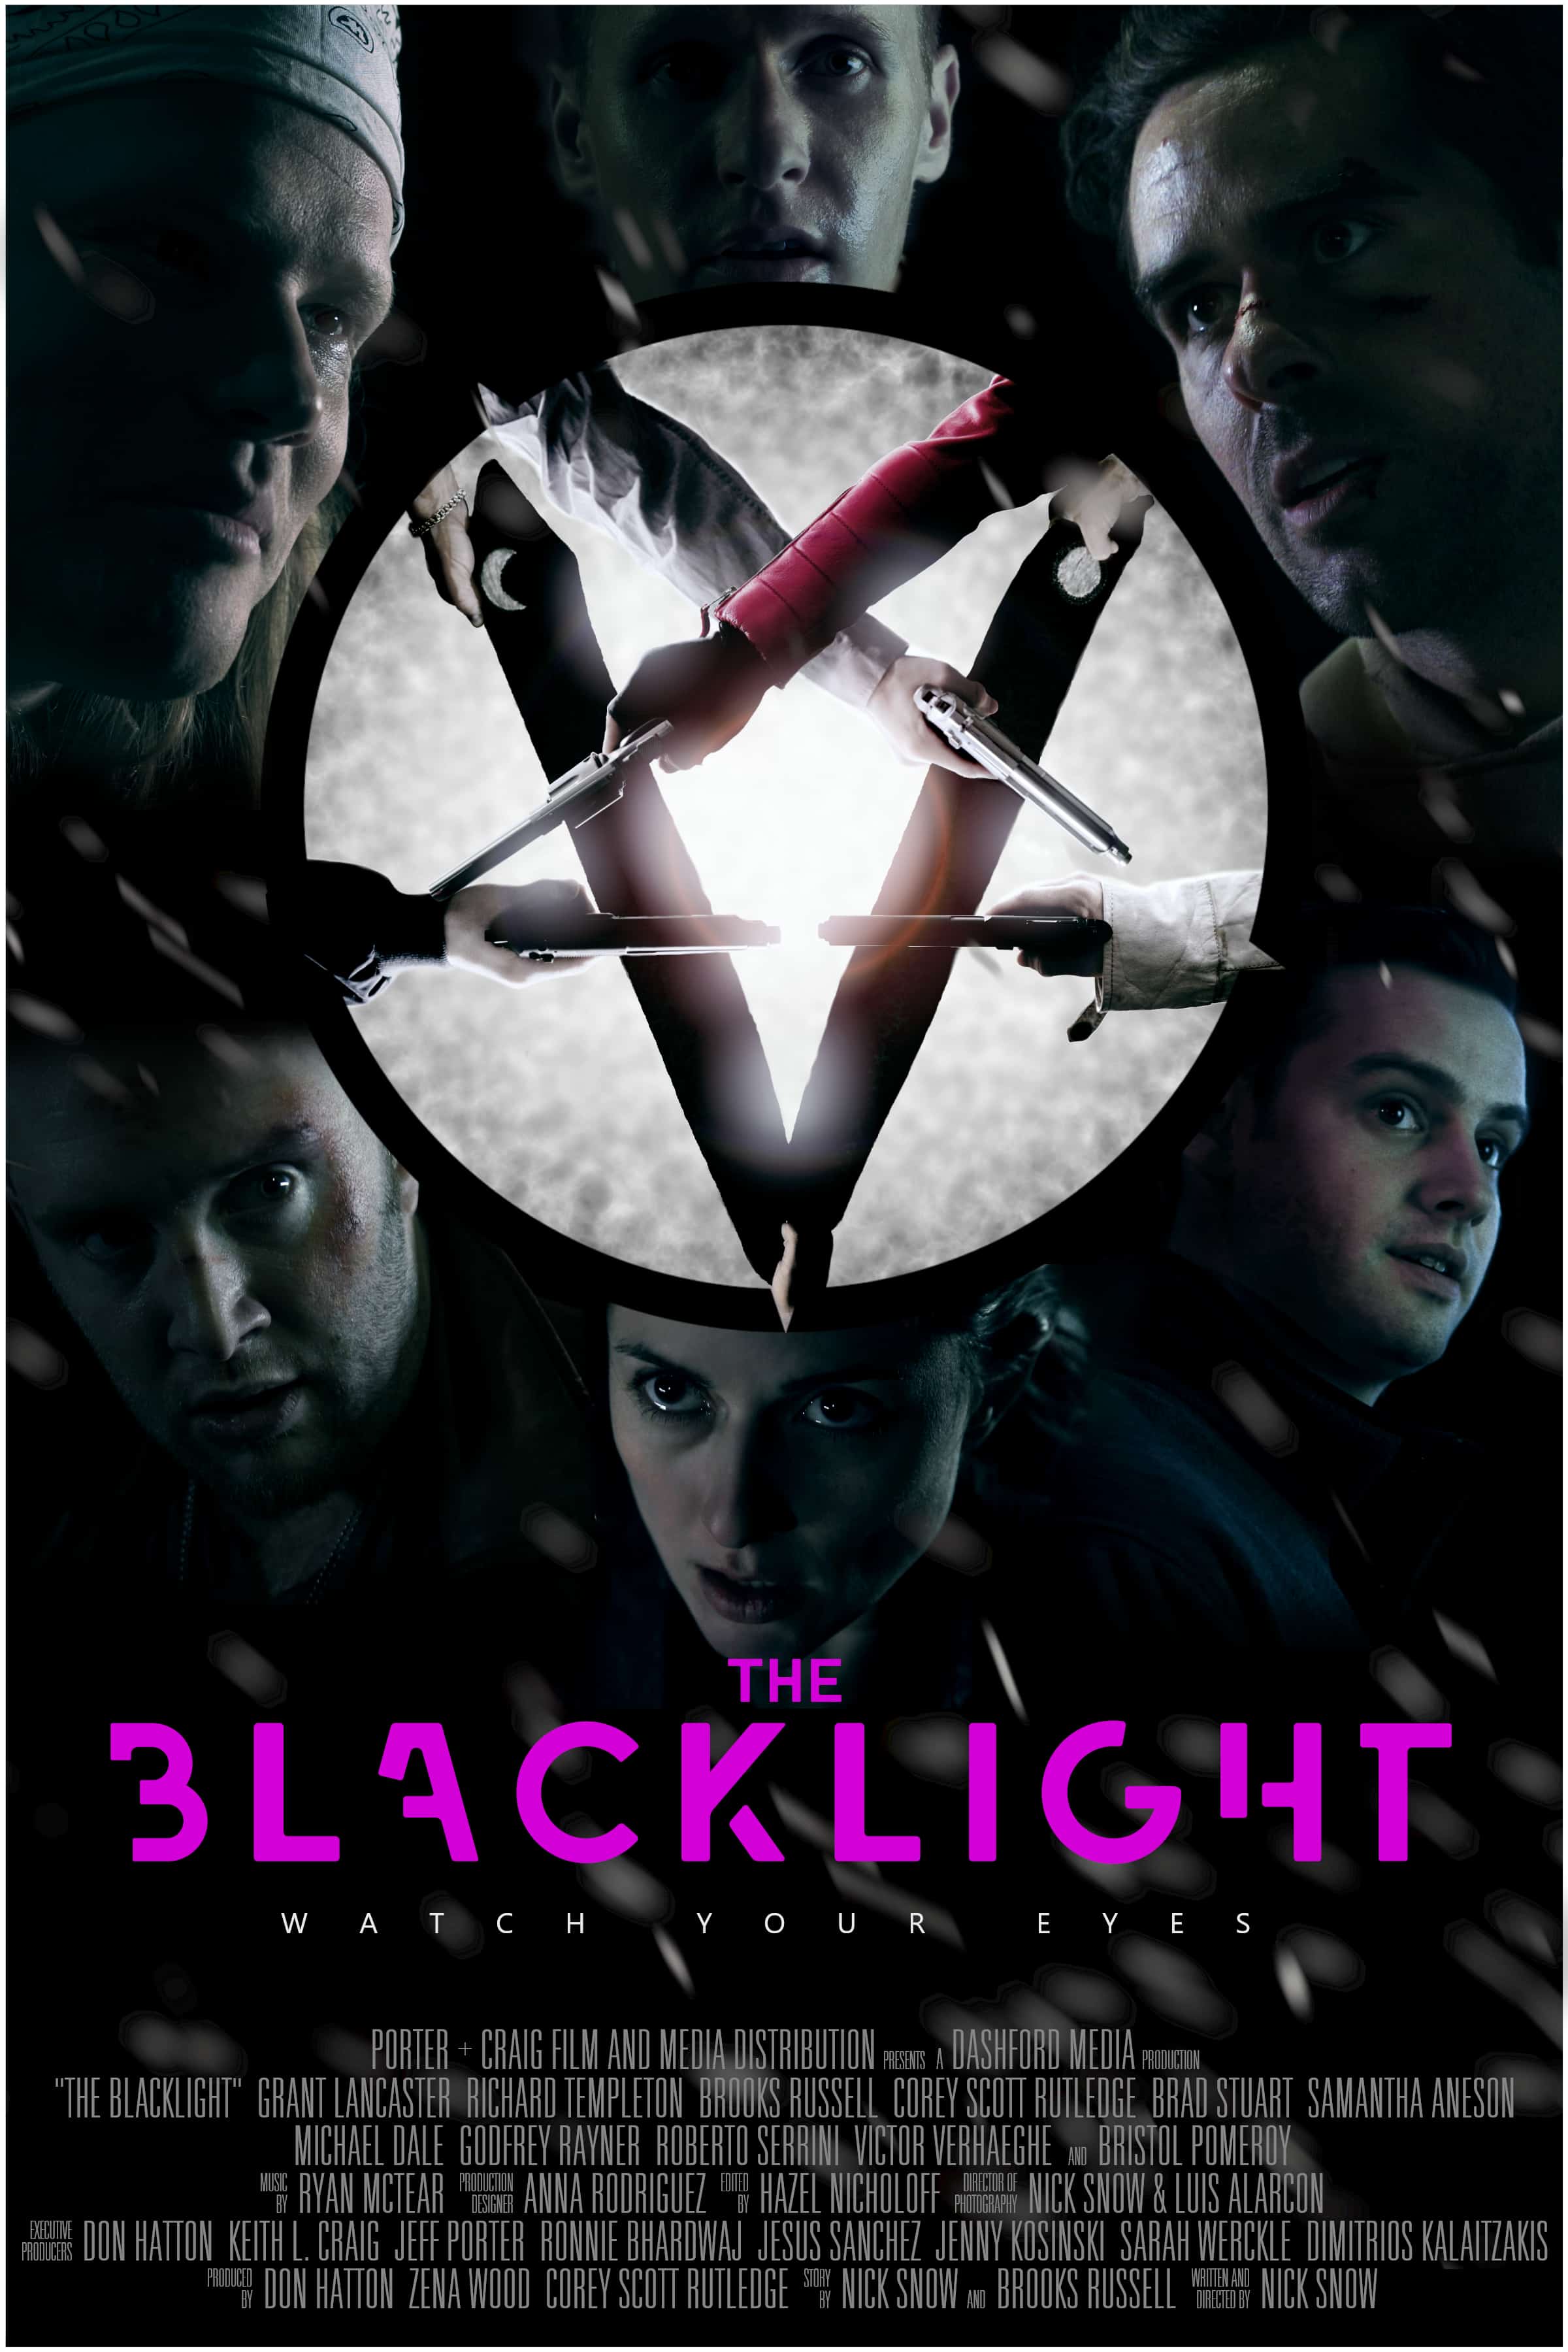 Introducing "The Blacklight": A Supernatural Thriller by Dashford Media and Director Nick Snow 23